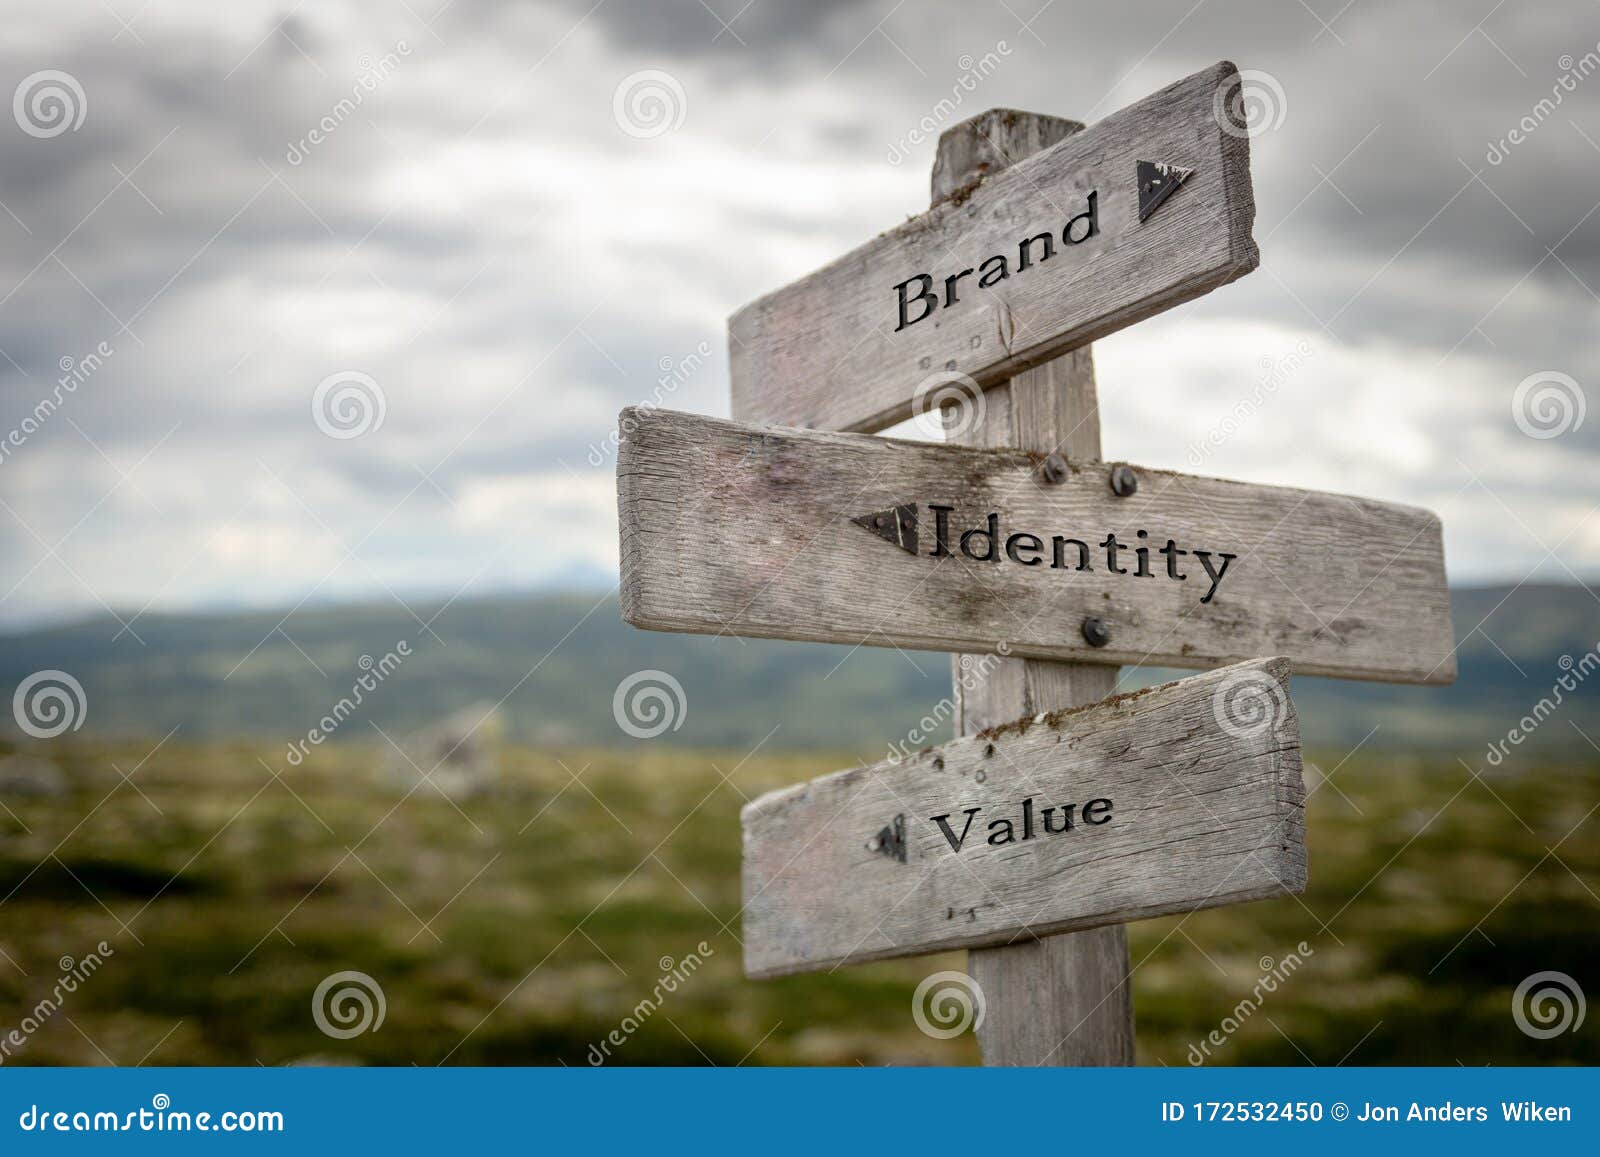 brand, identity and value